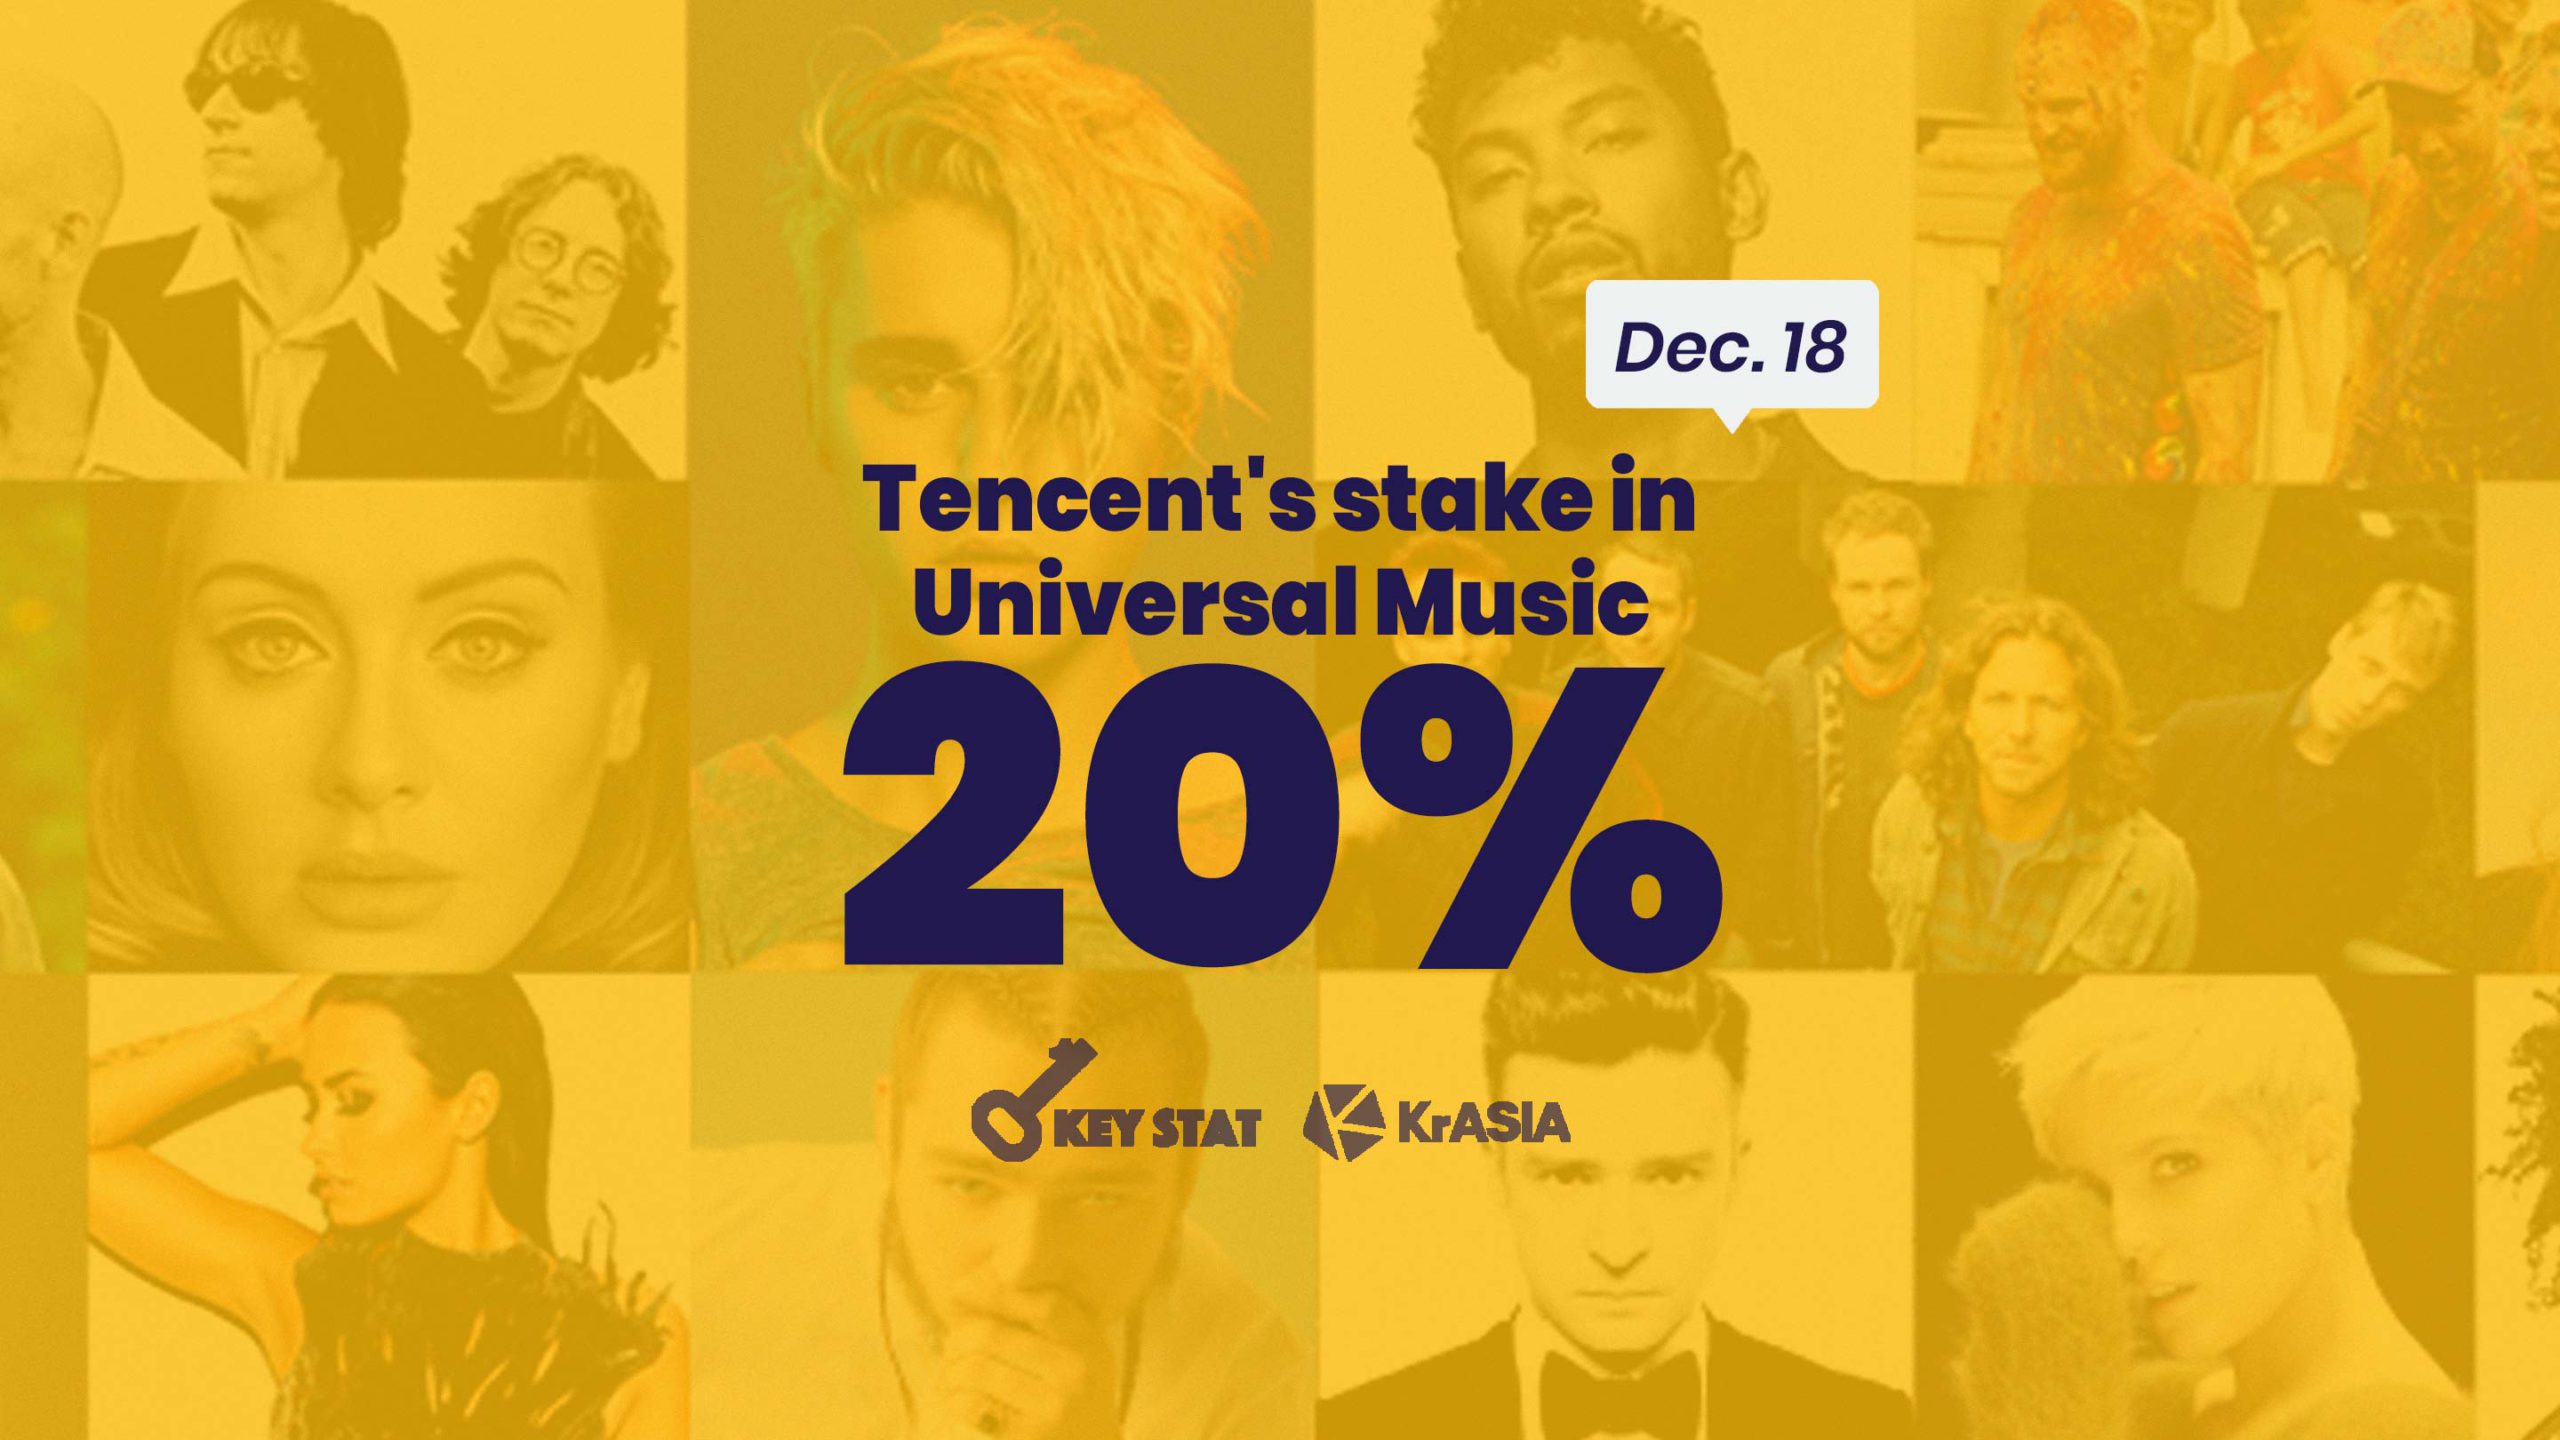 KEY STAT | Tencent buys additional 10% stake in Universal Music Group